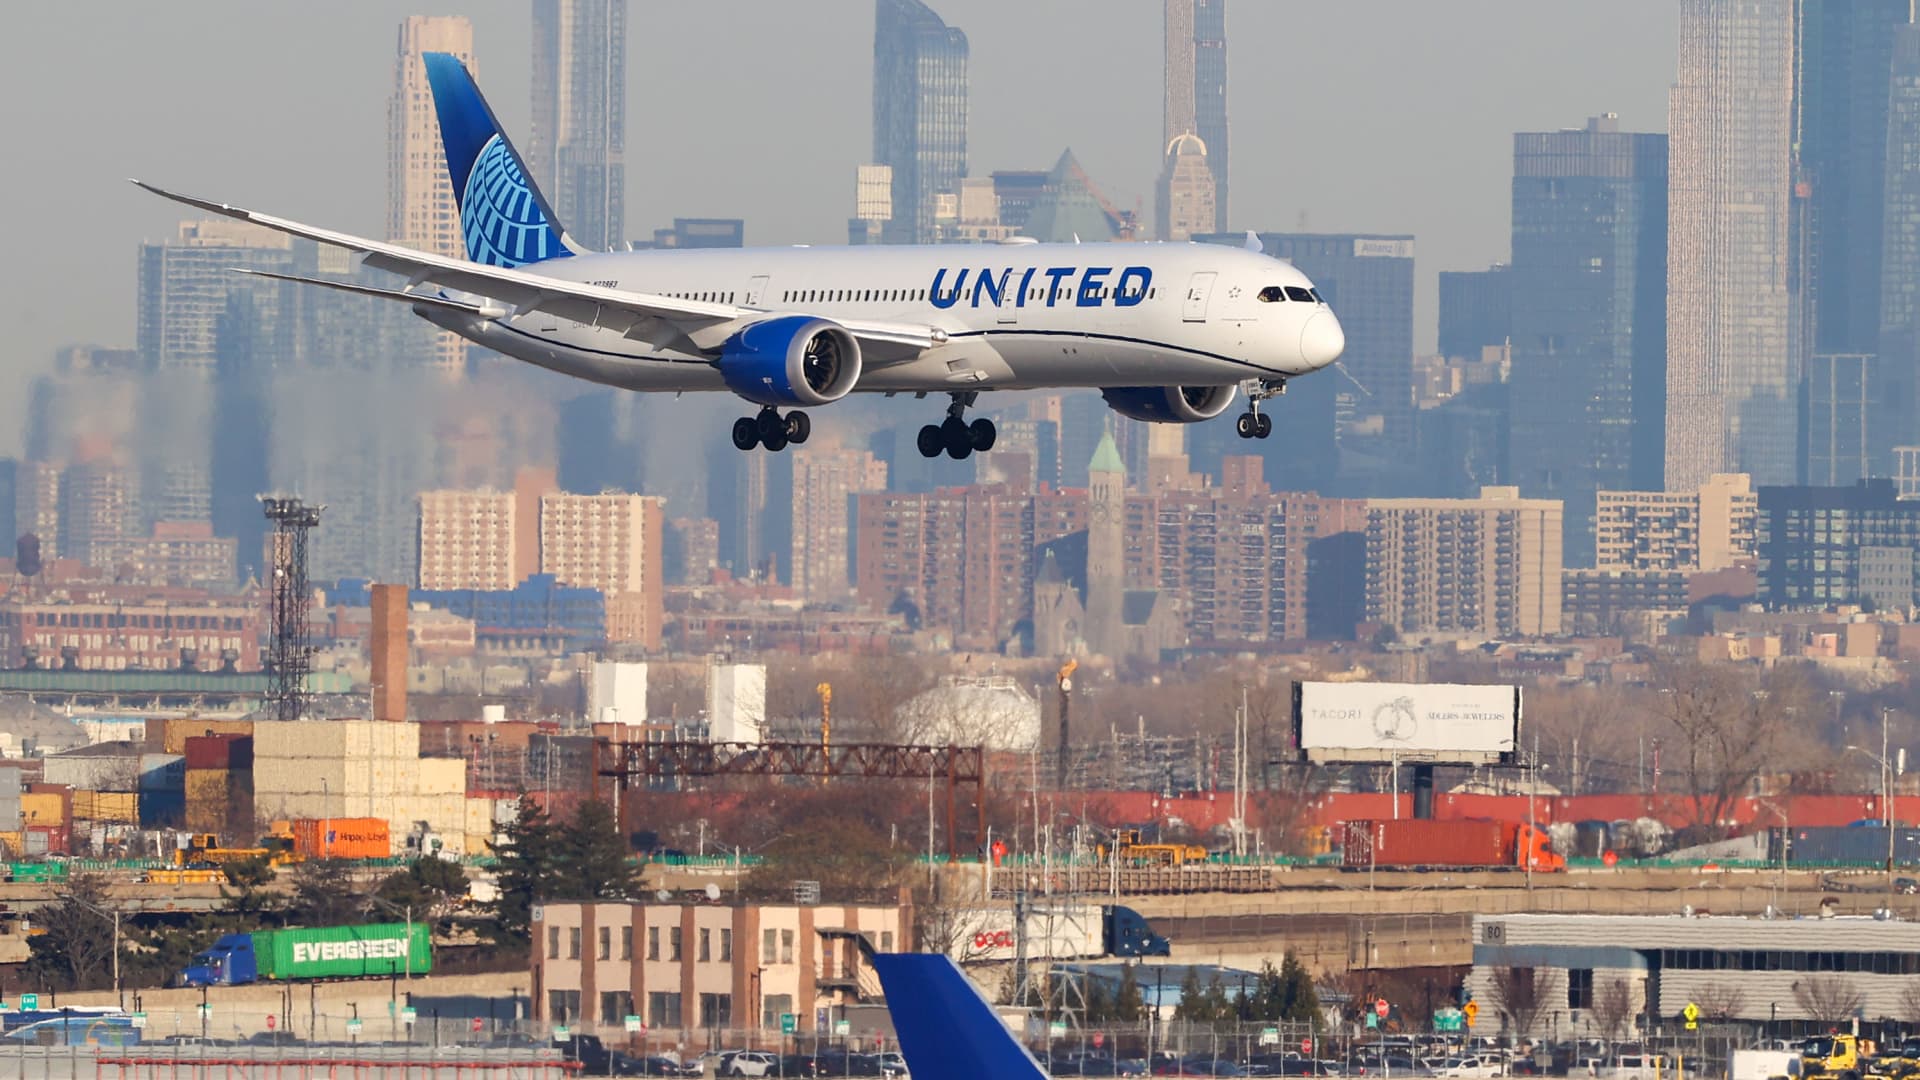 A United Airlines passenger airplane is landing on Newark Liberty International Airport in Newark, New Jersey, on January 19, 2022.